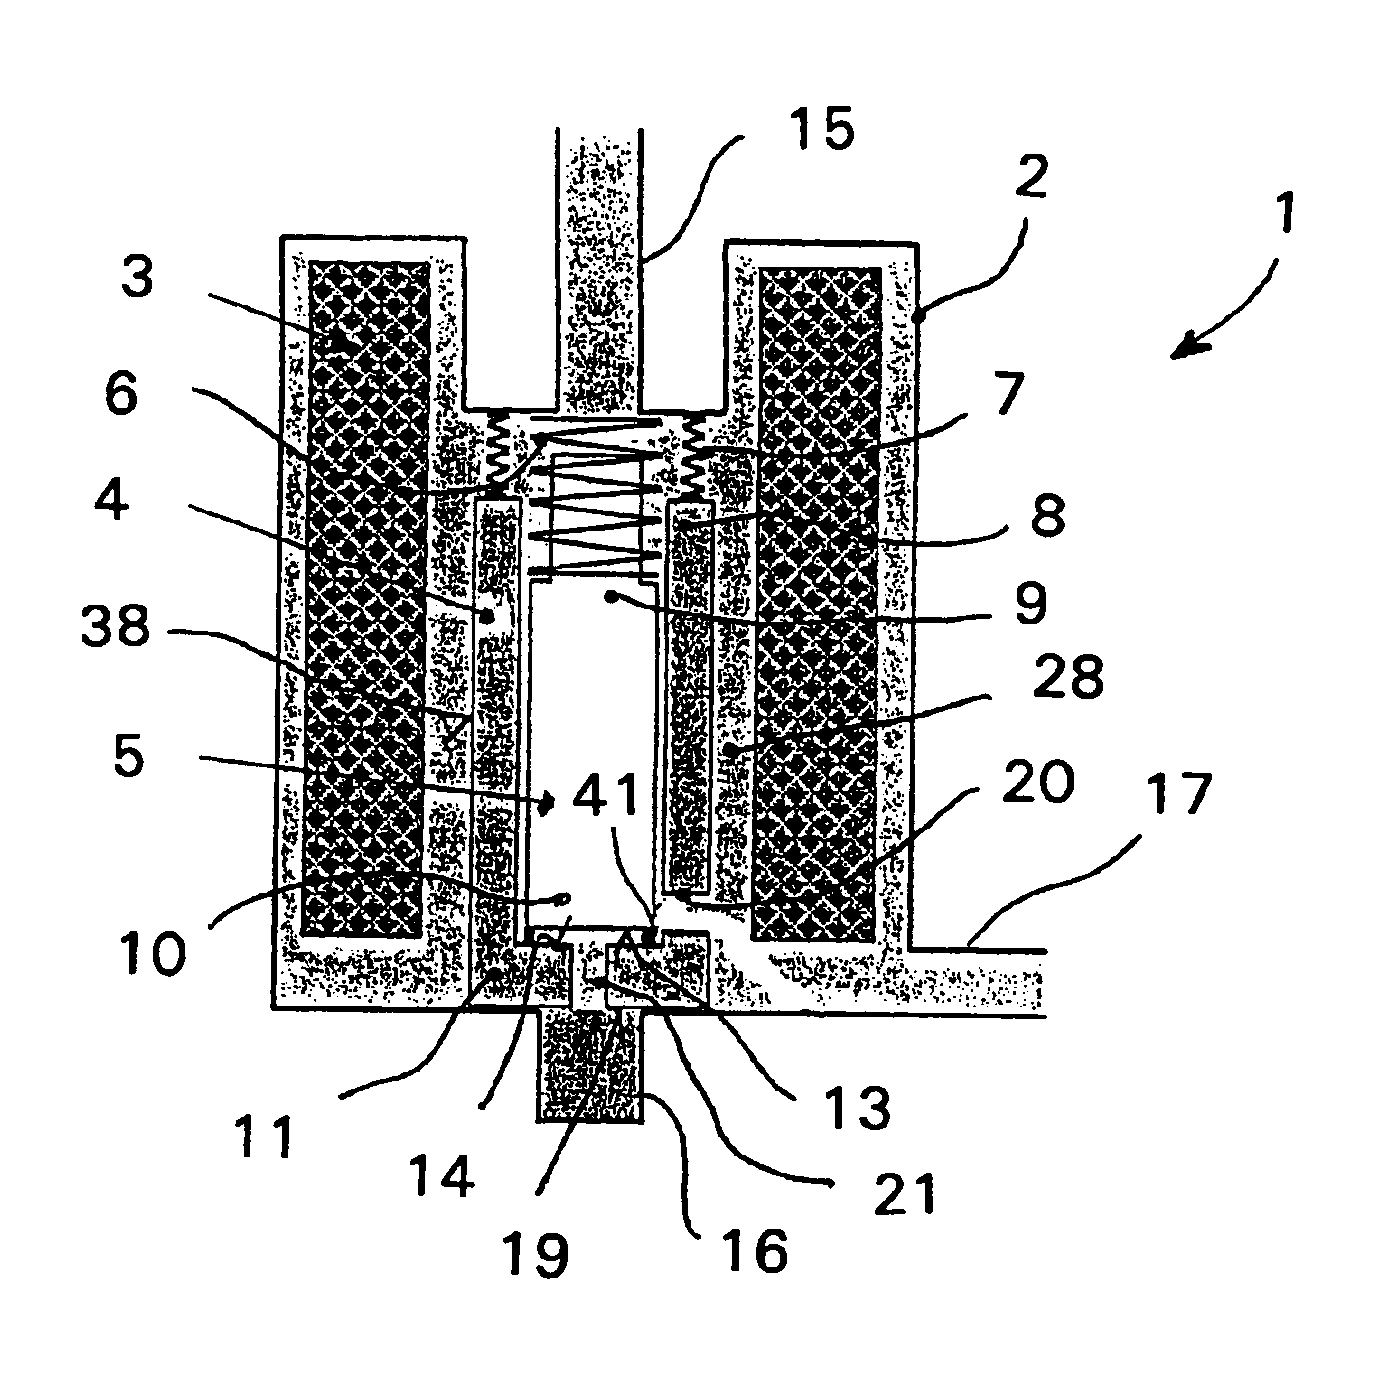 Electromagnetic double switching valve